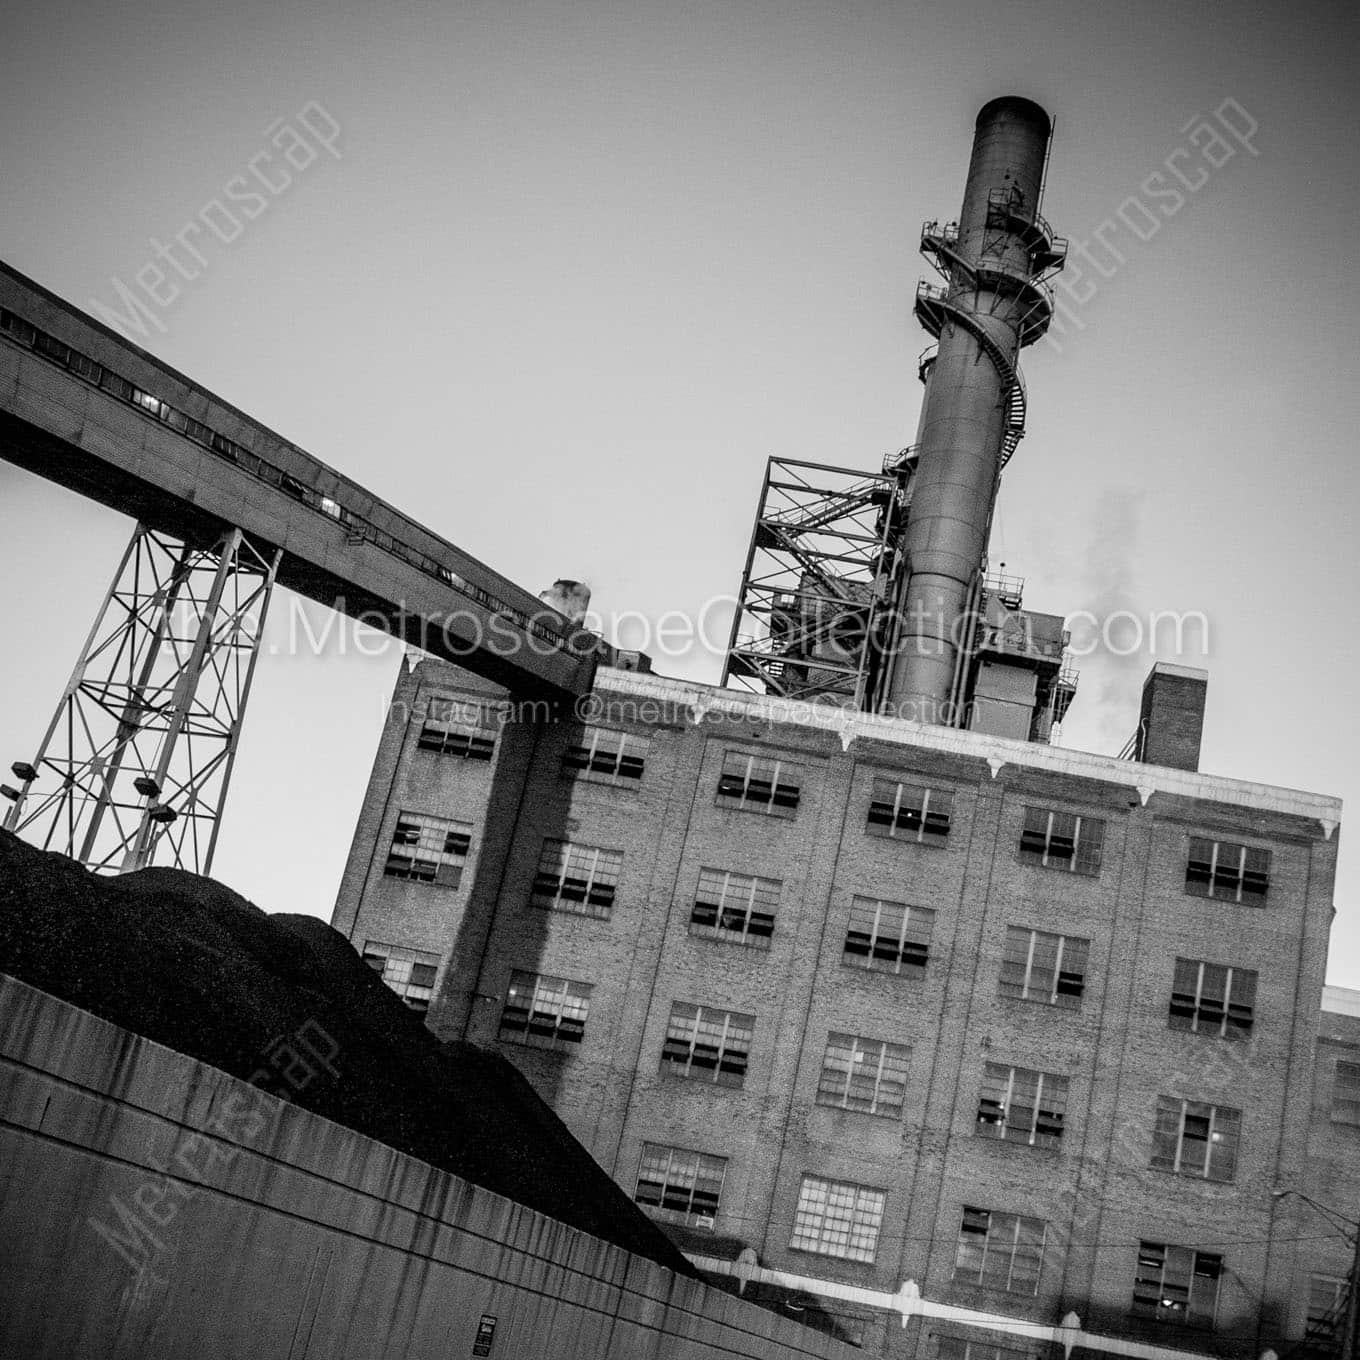 citizens thermal power plant Black & White Wall Art